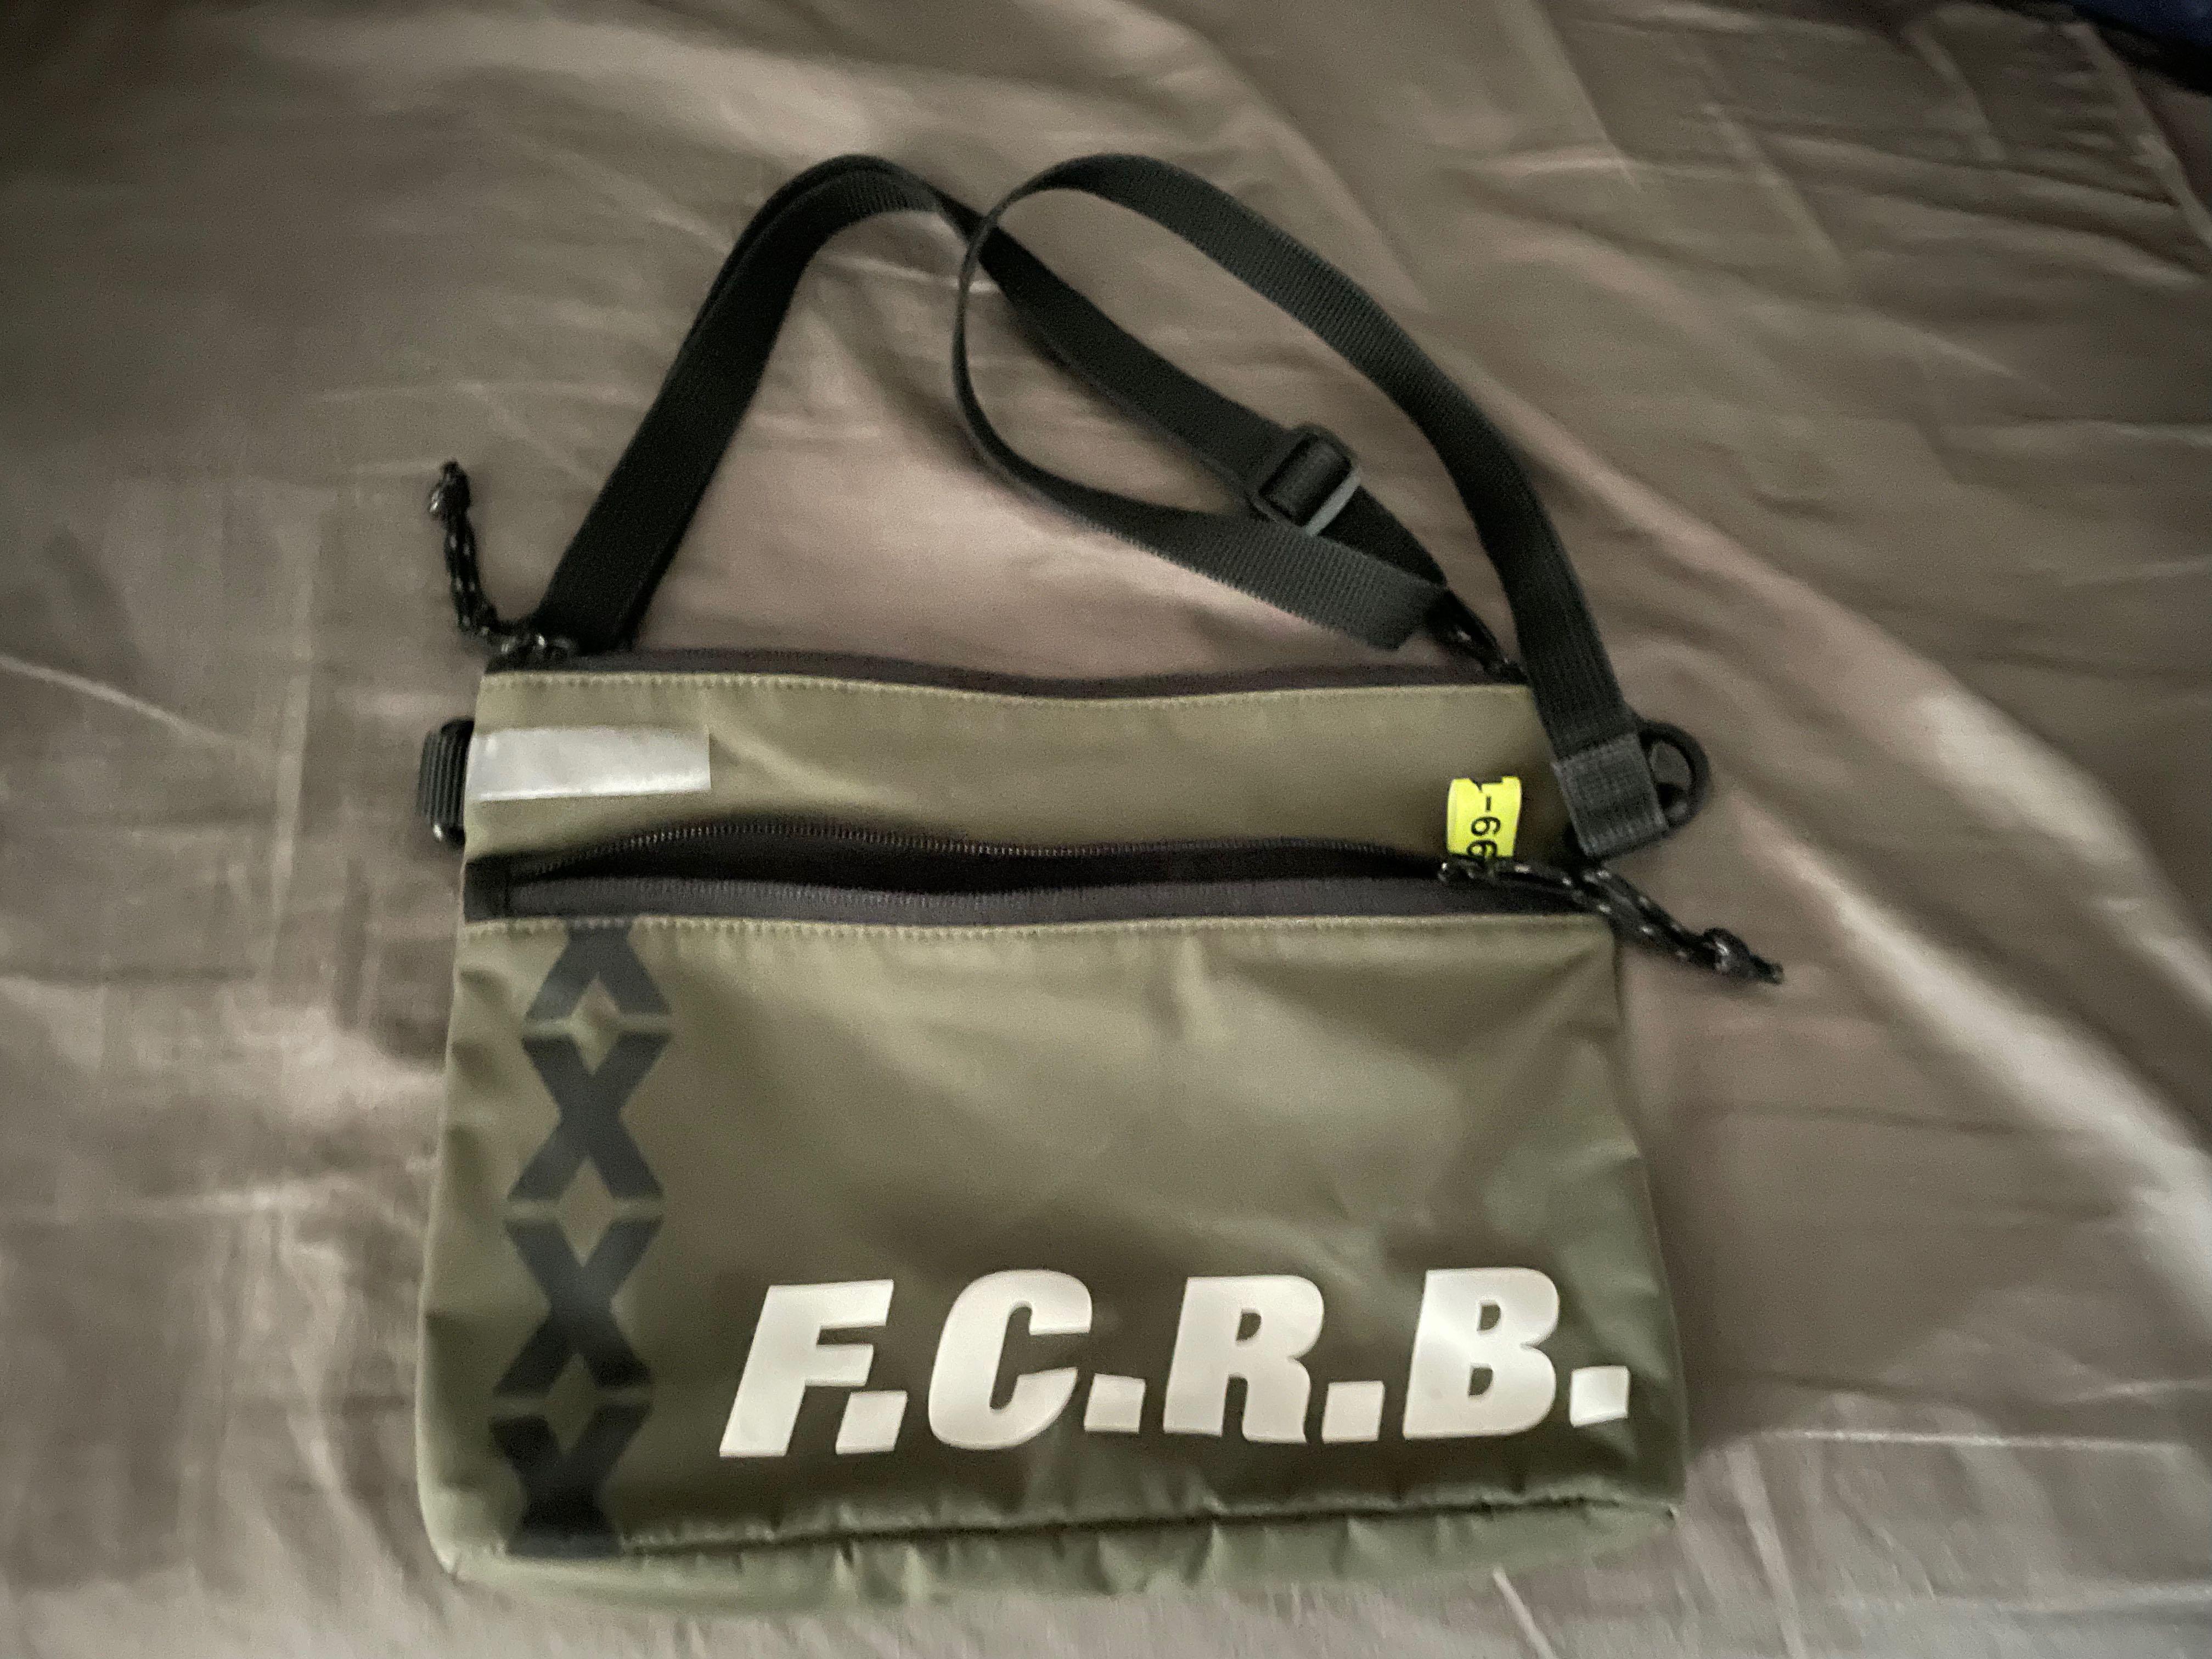 FCRB 23SS SMALL TOTE BAG 新品　ブリストル トートバッグ